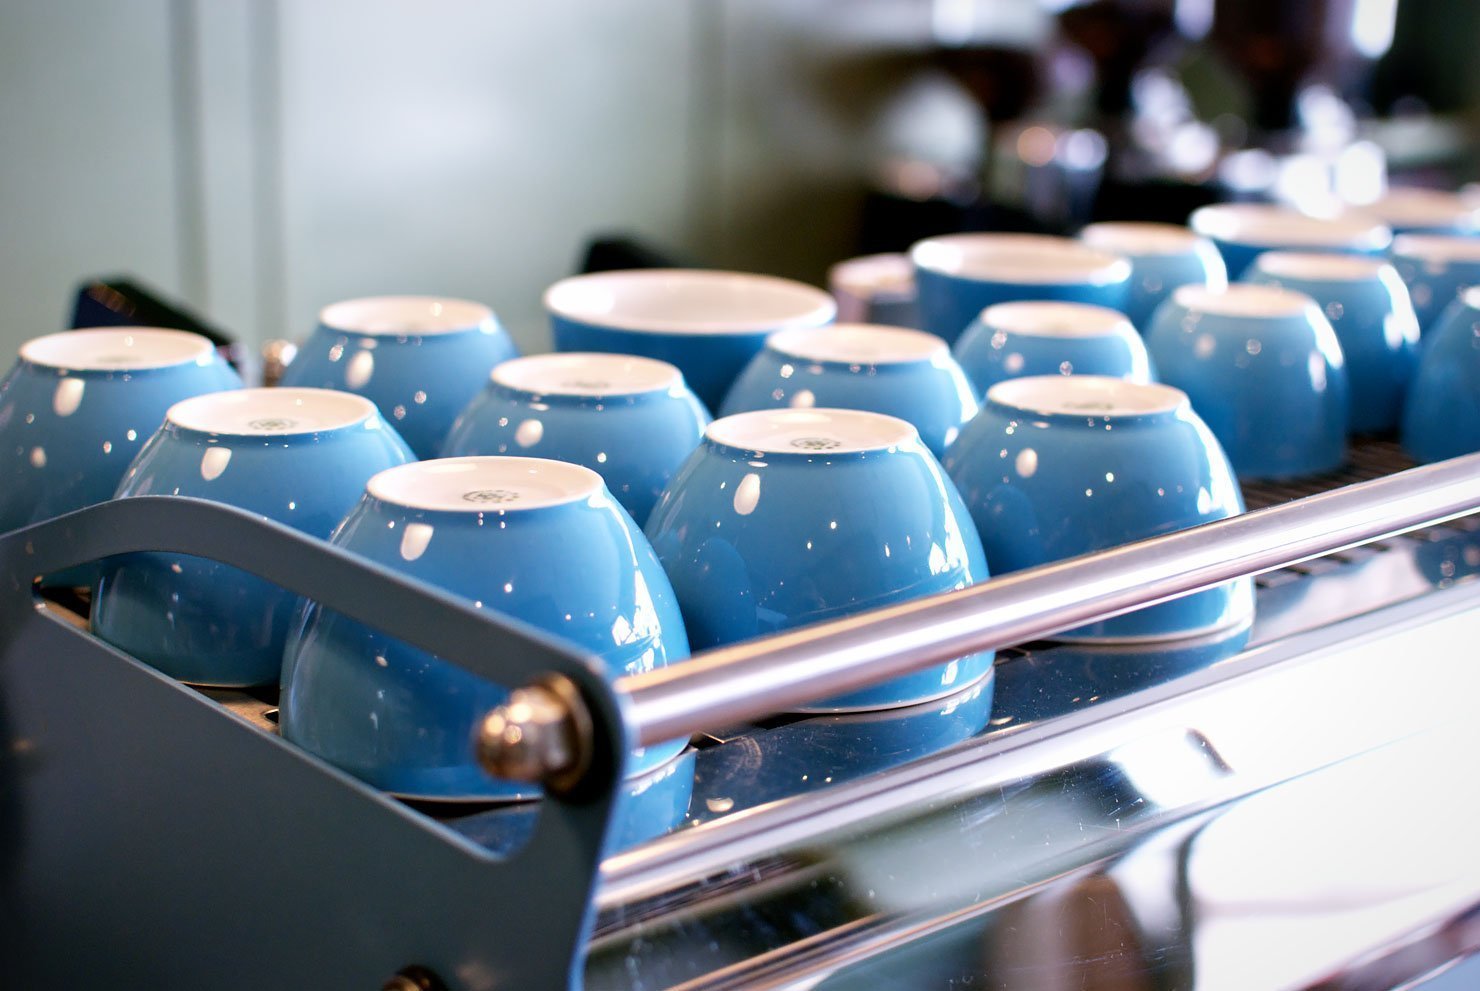 The blue coffee cups at Workshop Coffee & Co. in Marylebone, London - One of London's best coffee places.